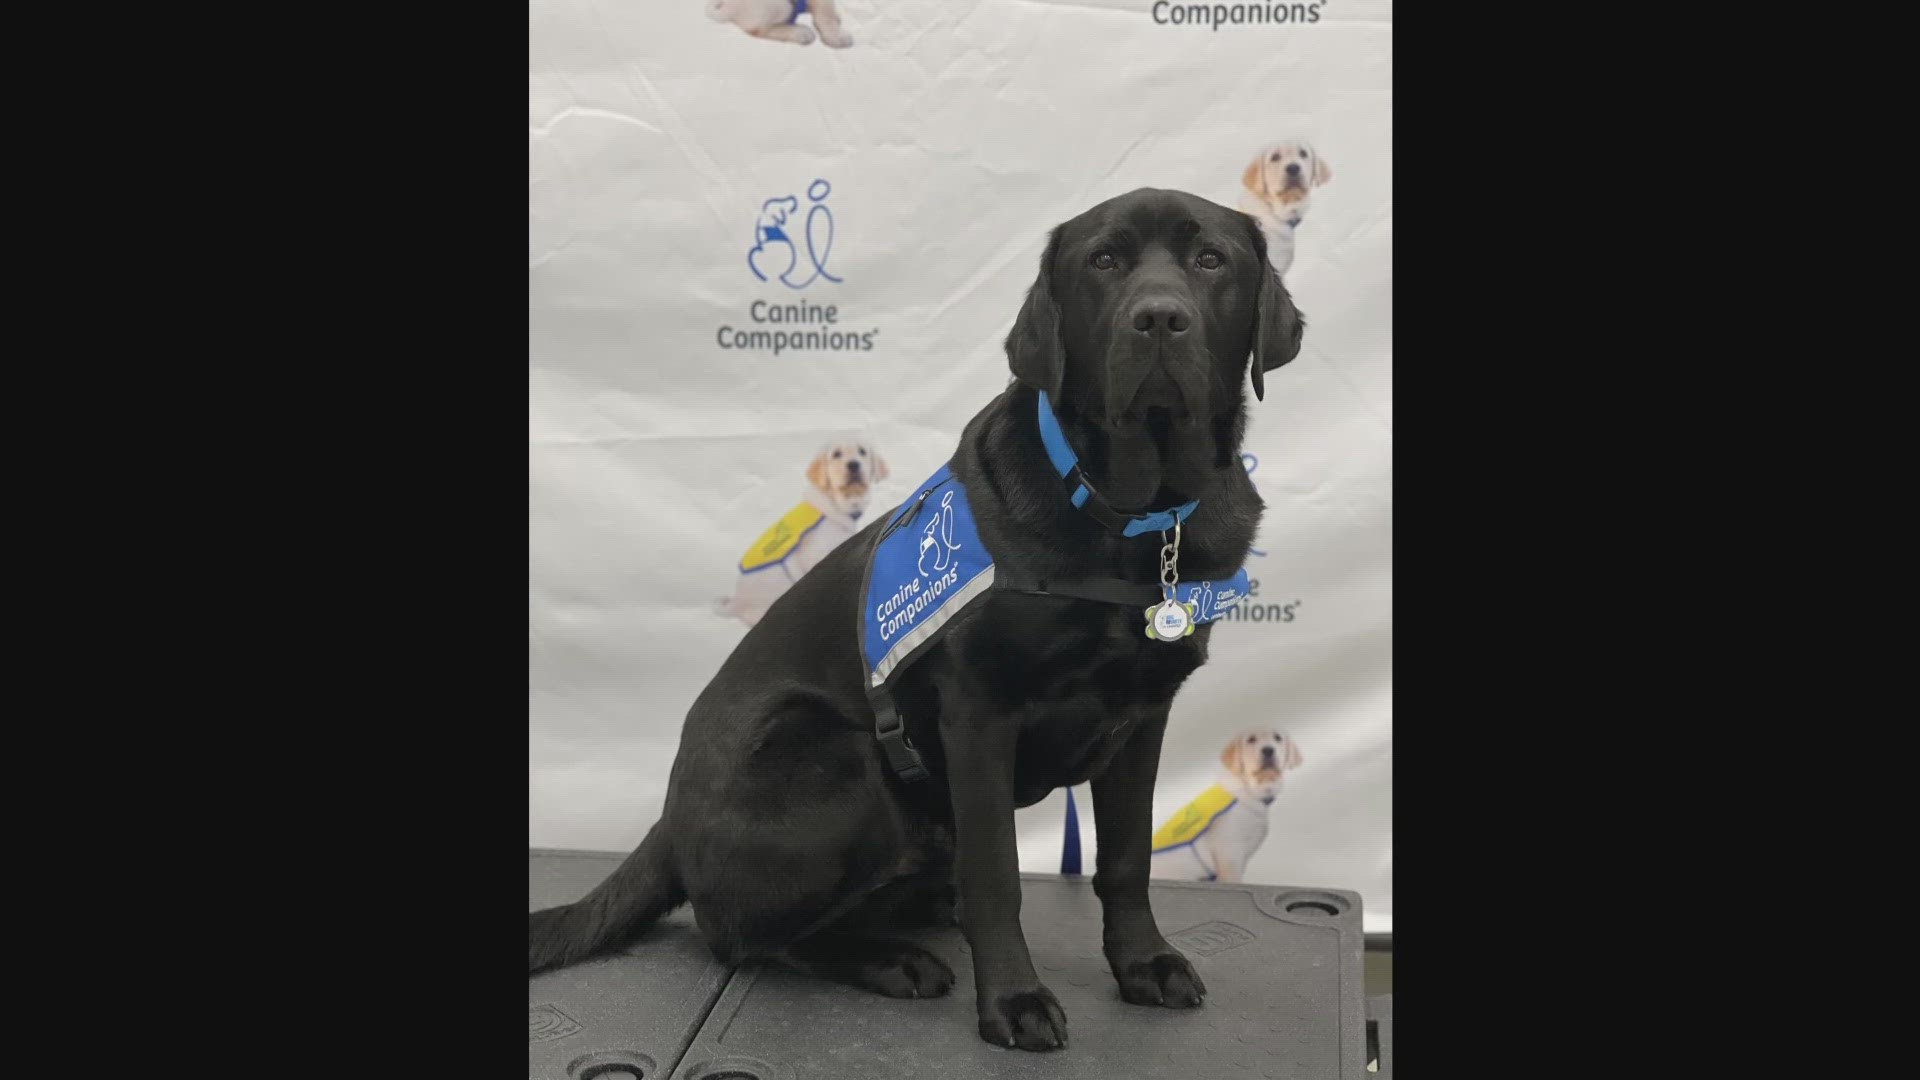 To celebrate National Puppy Day on Saturday, March 23, the service dog nonprofit Canine Companions is raising awareness about its puppy-raising volunteer program.